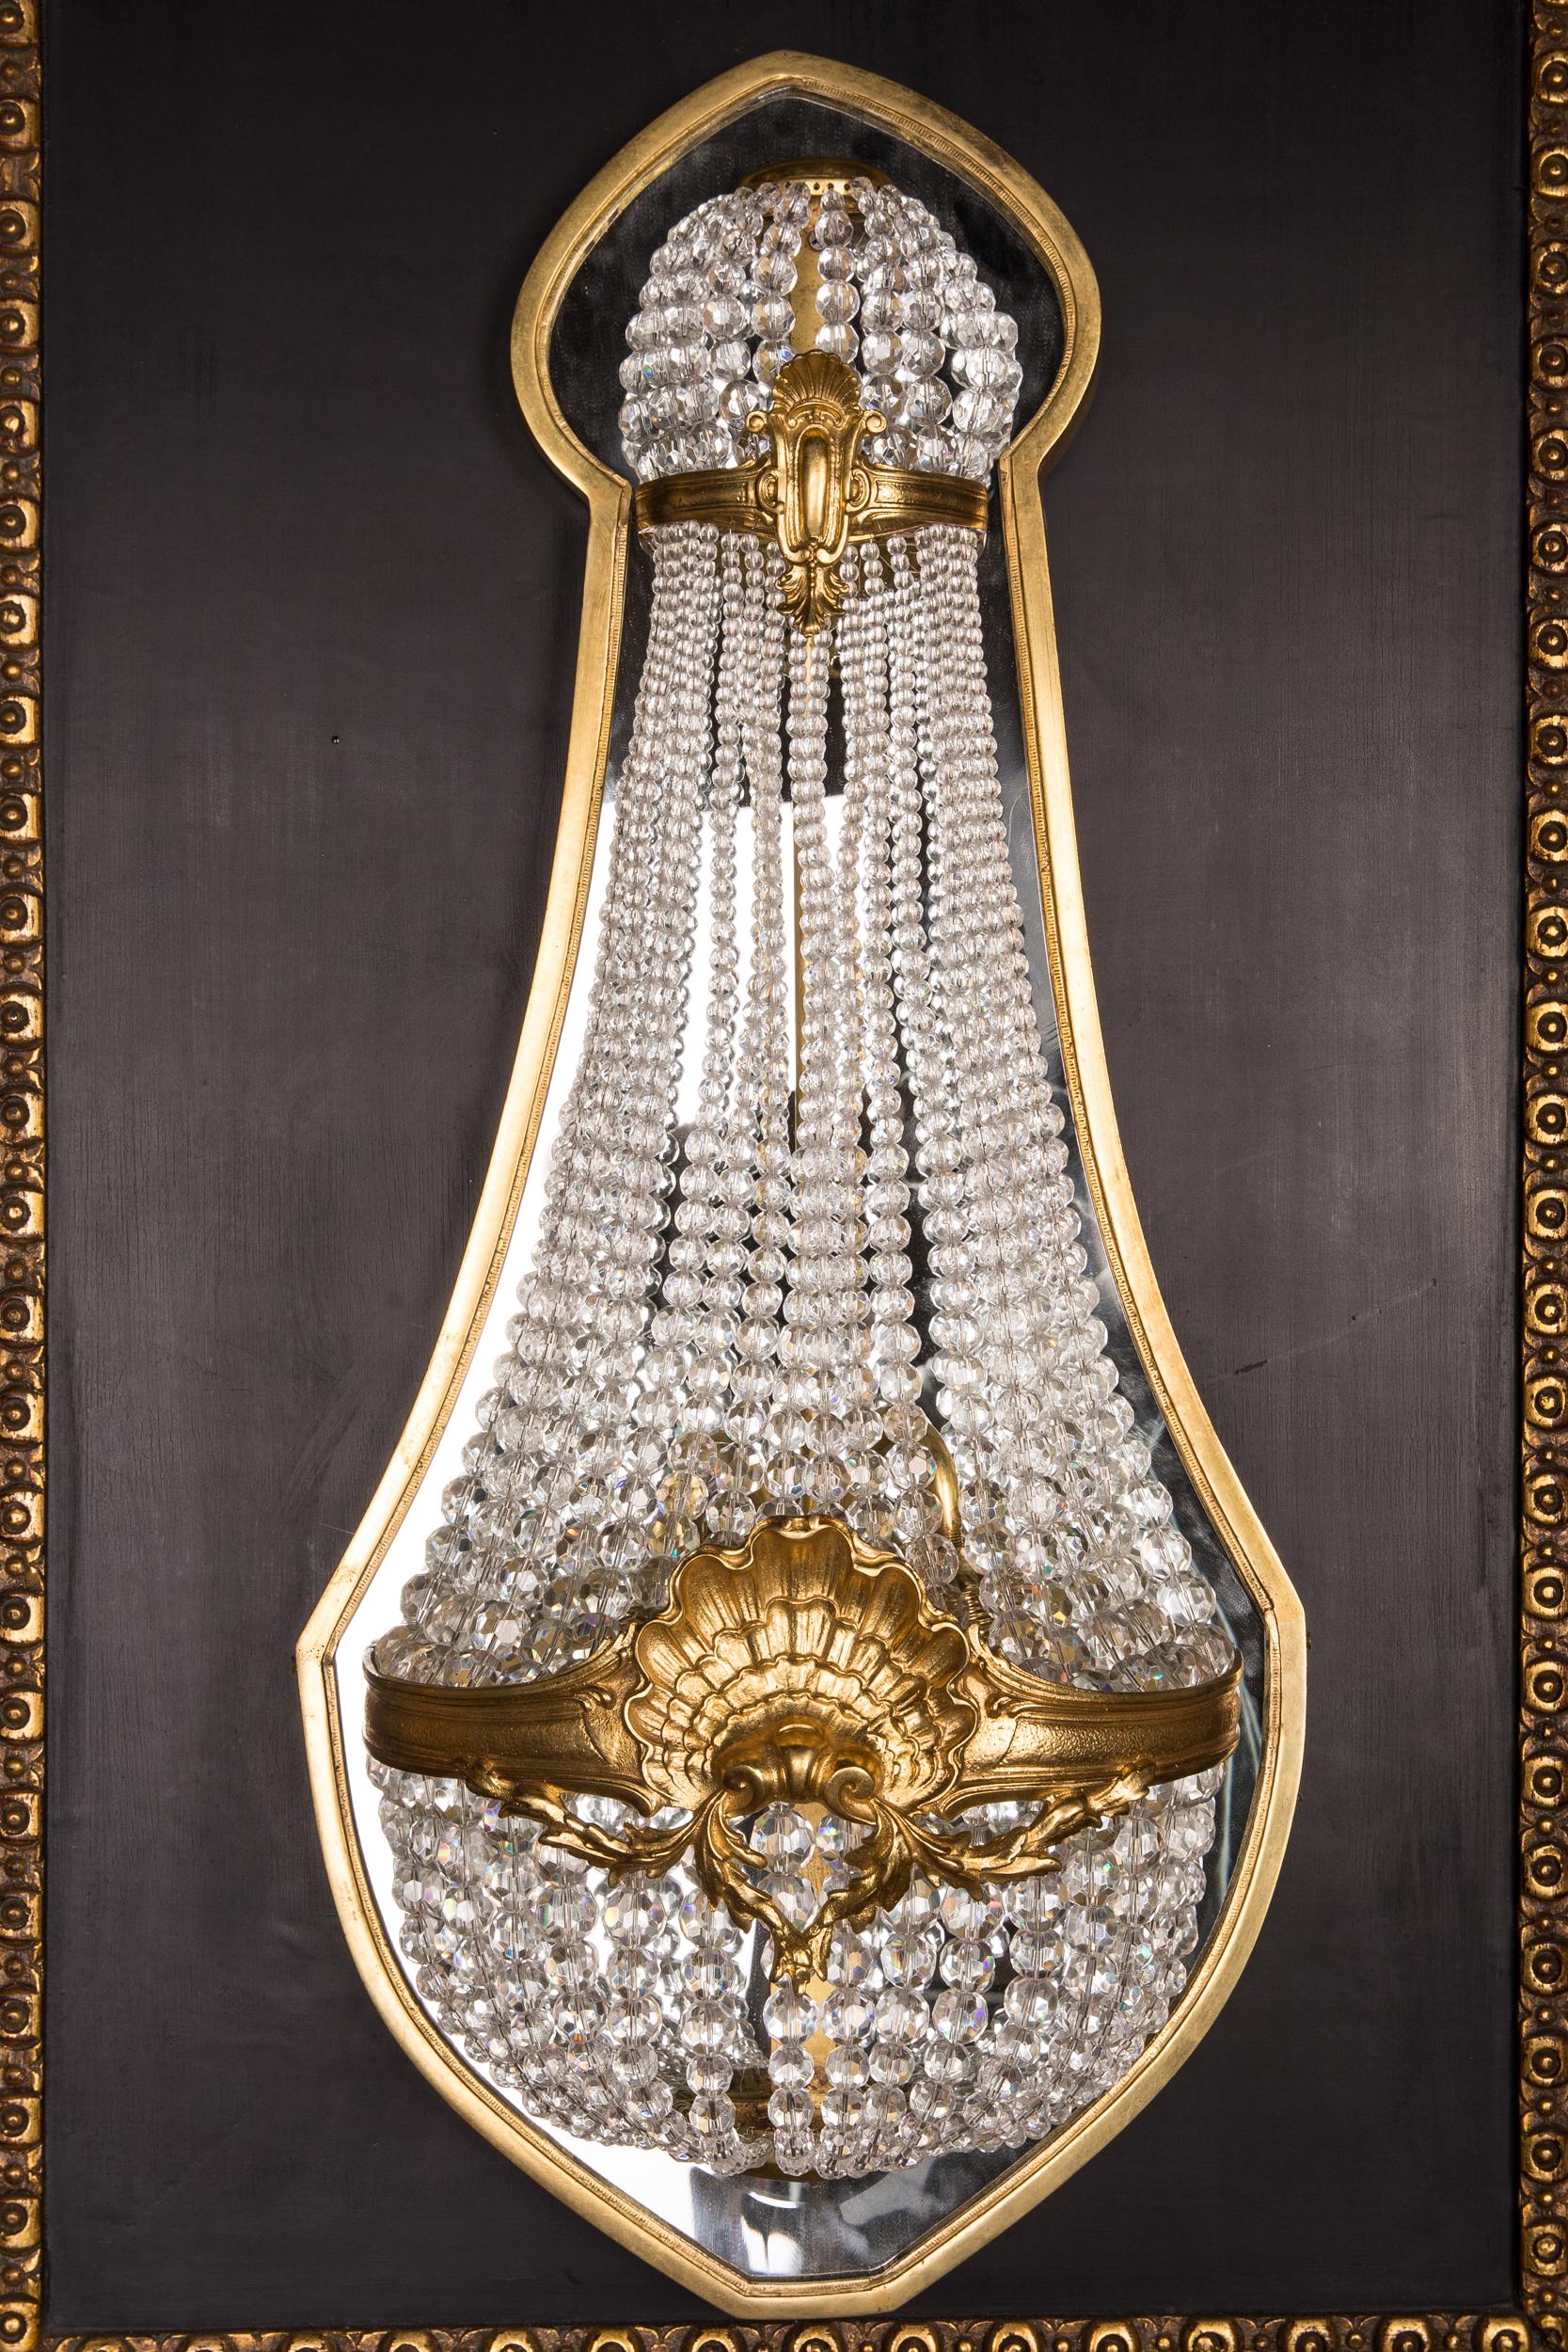 A classicist sconce with finely engraved bronze. Basket-shaped body made of handcut franz. Sphere prisms in the course connected by broad, ornamental relief-shaped hoop in the center of the attached shell. The finely polished crystals break and